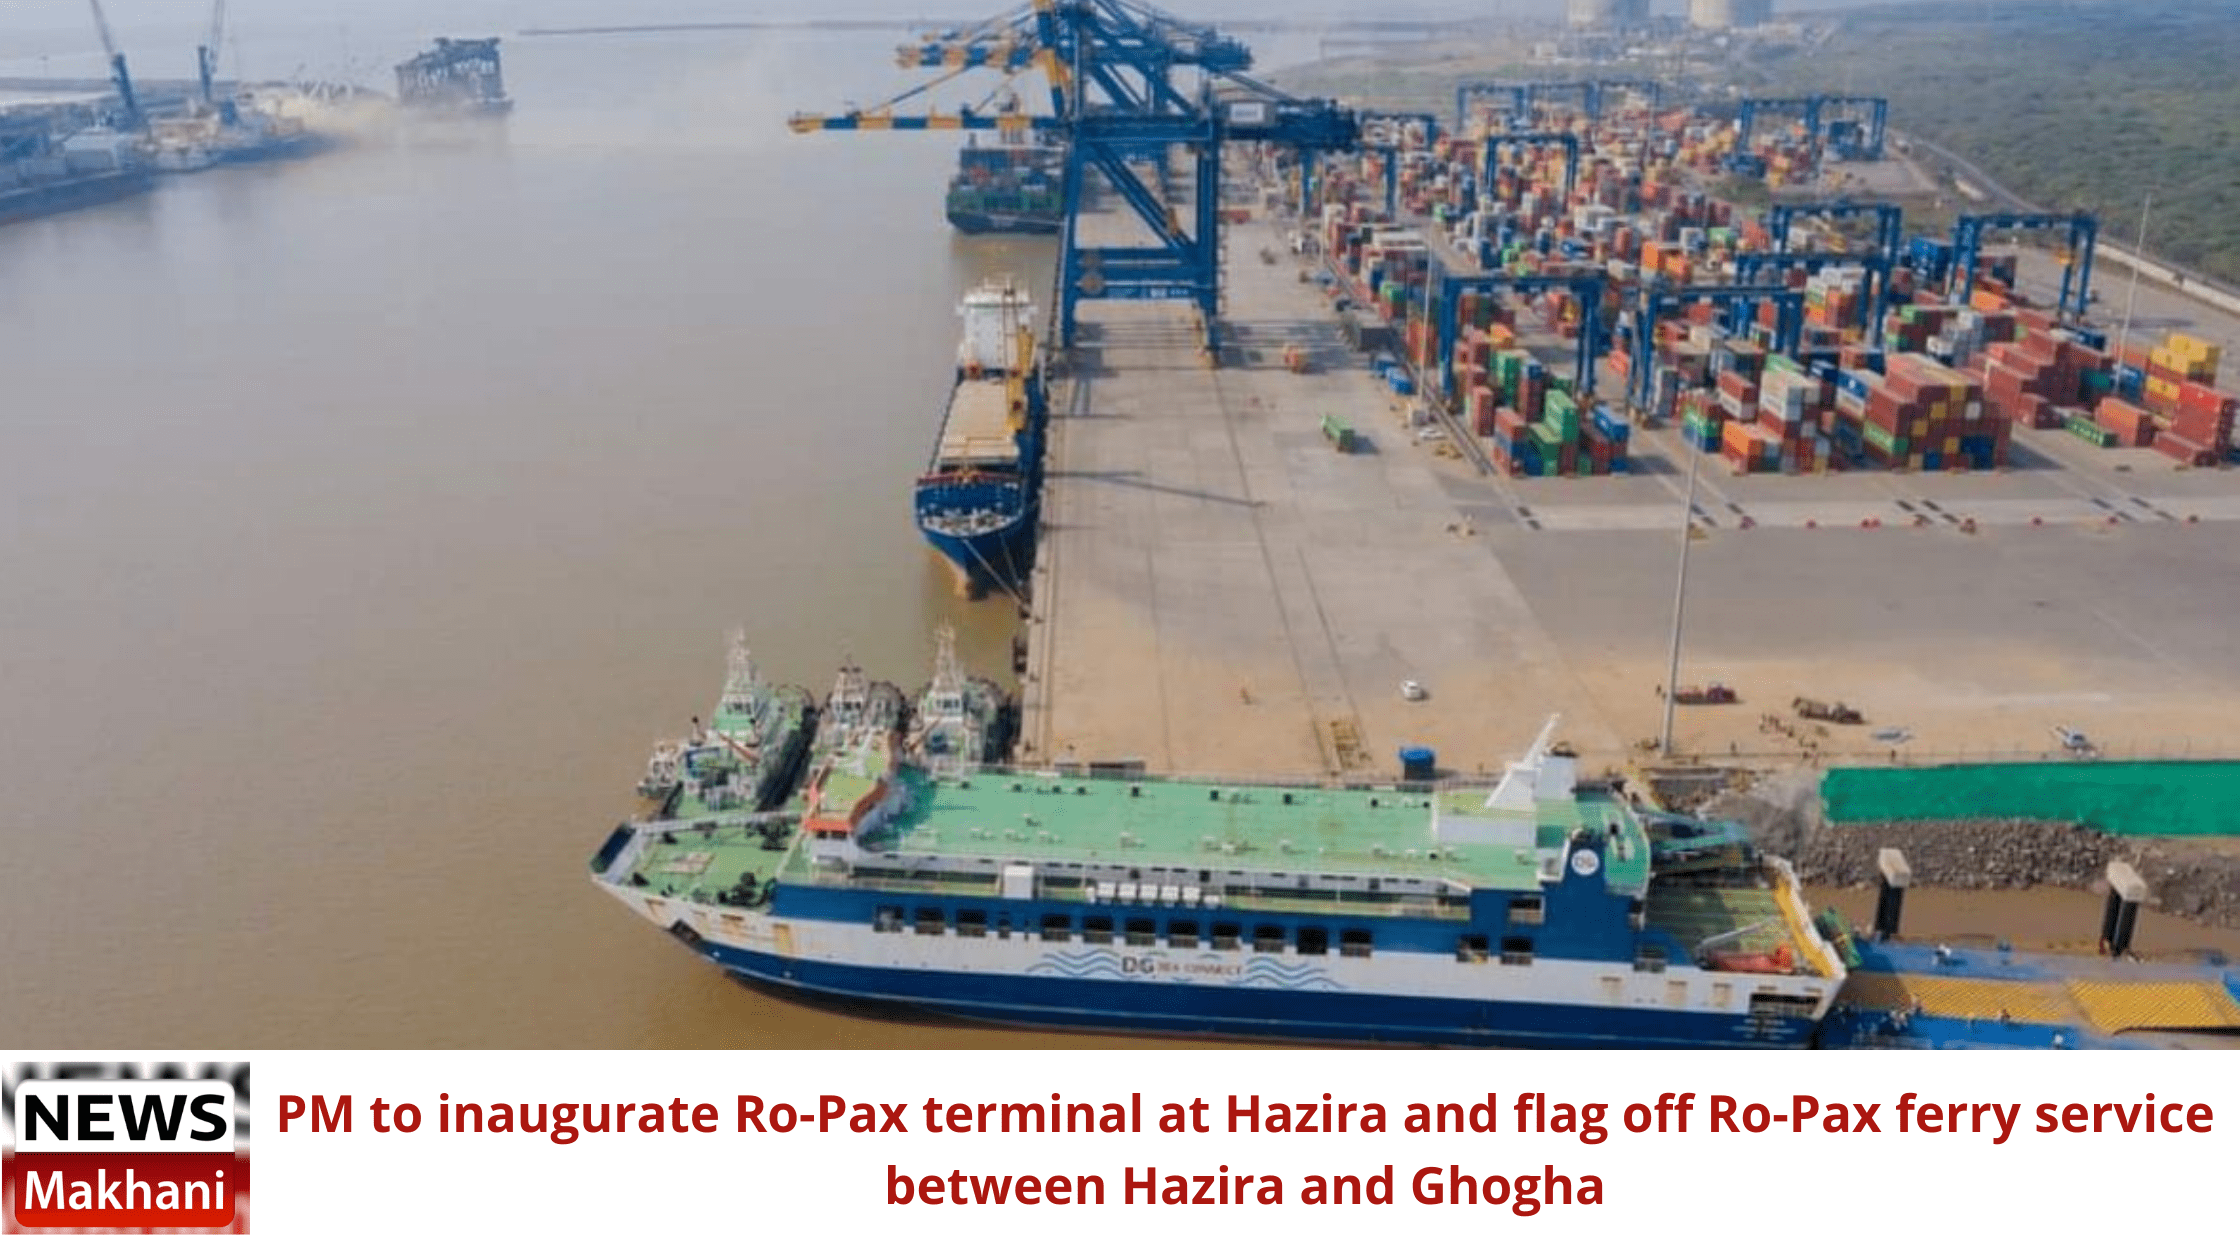 PM to inaugurate Ro-Pax terminal at Hazira and flag off Ro-Pax ferry service between Hazira and Ghogha